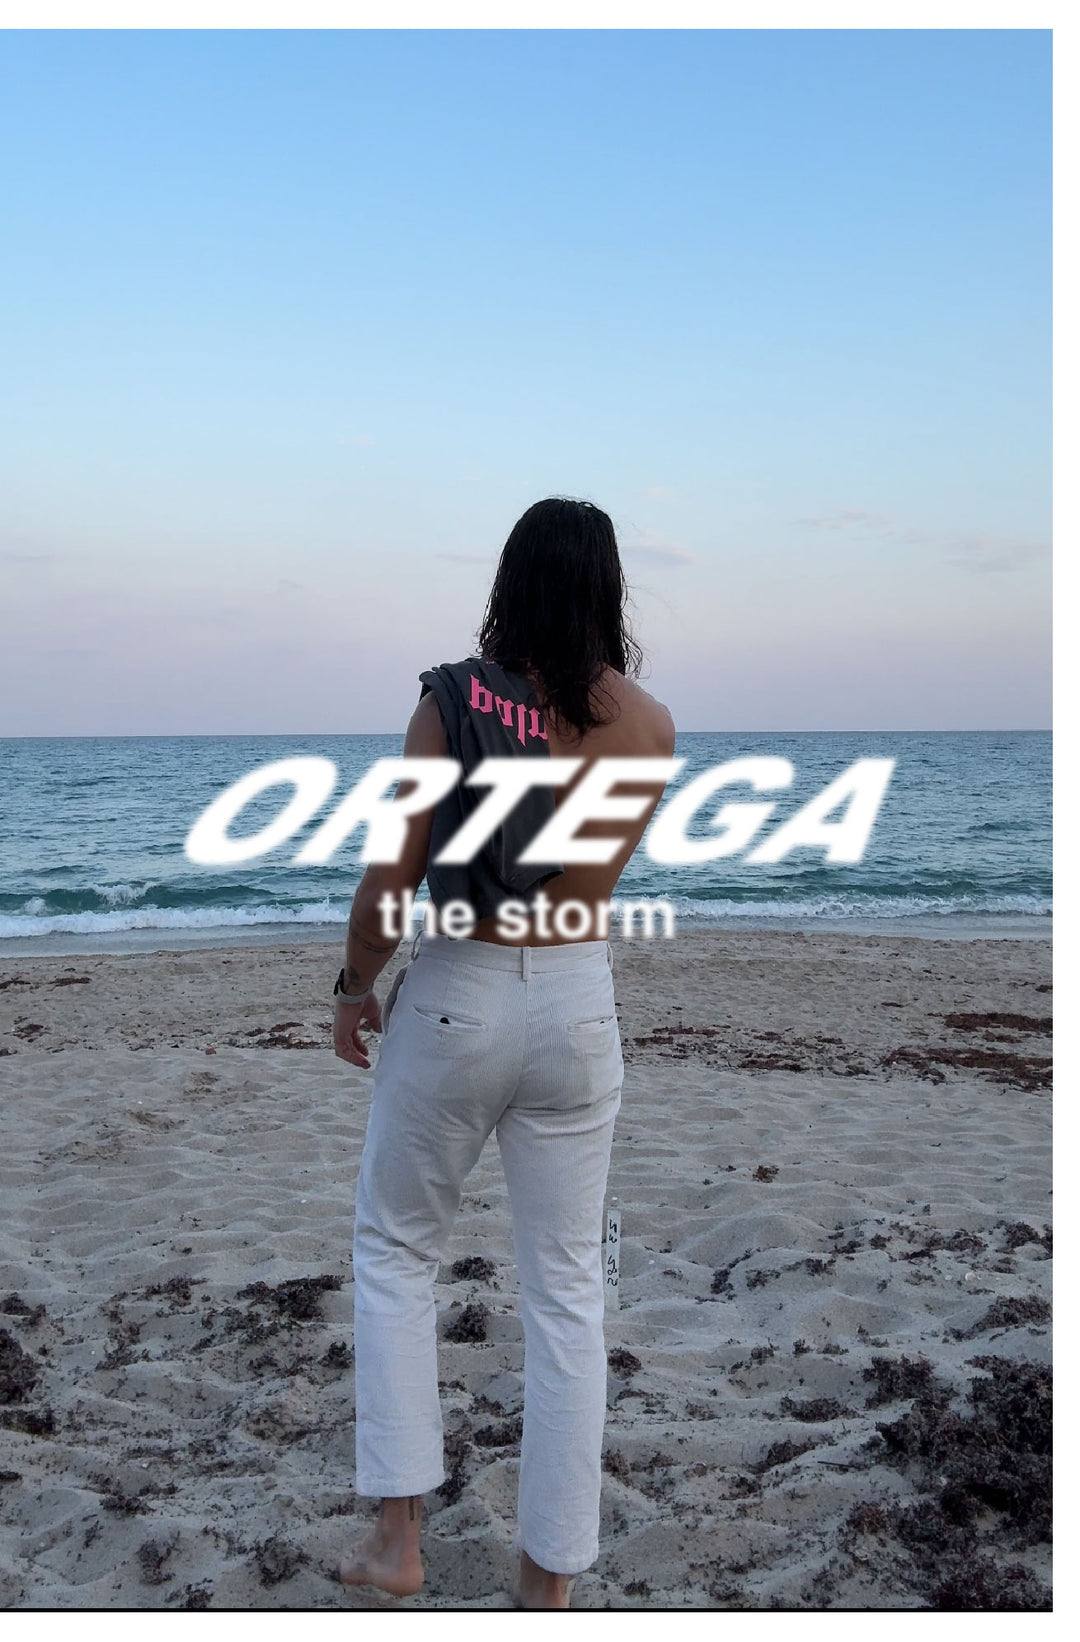 Ortega - In the middle of the storm